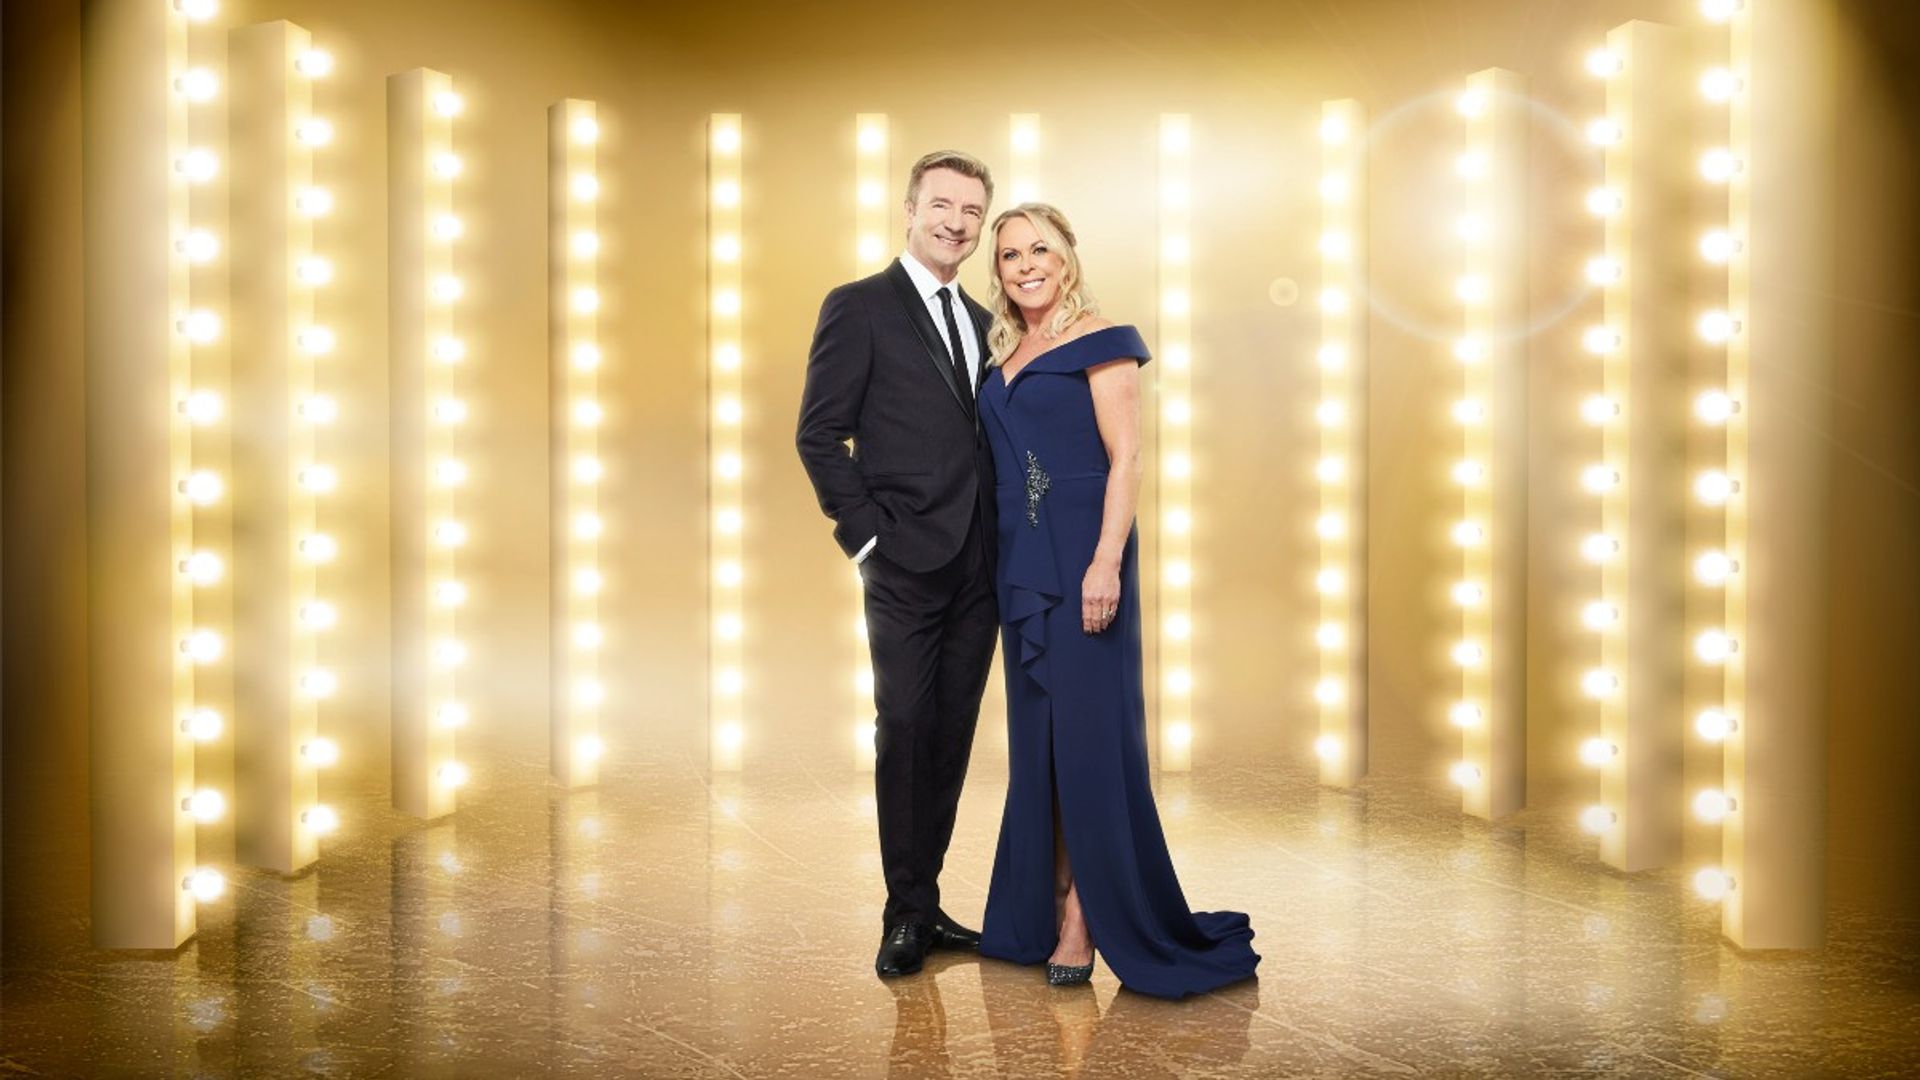 Dancing on Ice stars Jayne Torvill and Christopher Dean say show's 'curse' is not a bad thing